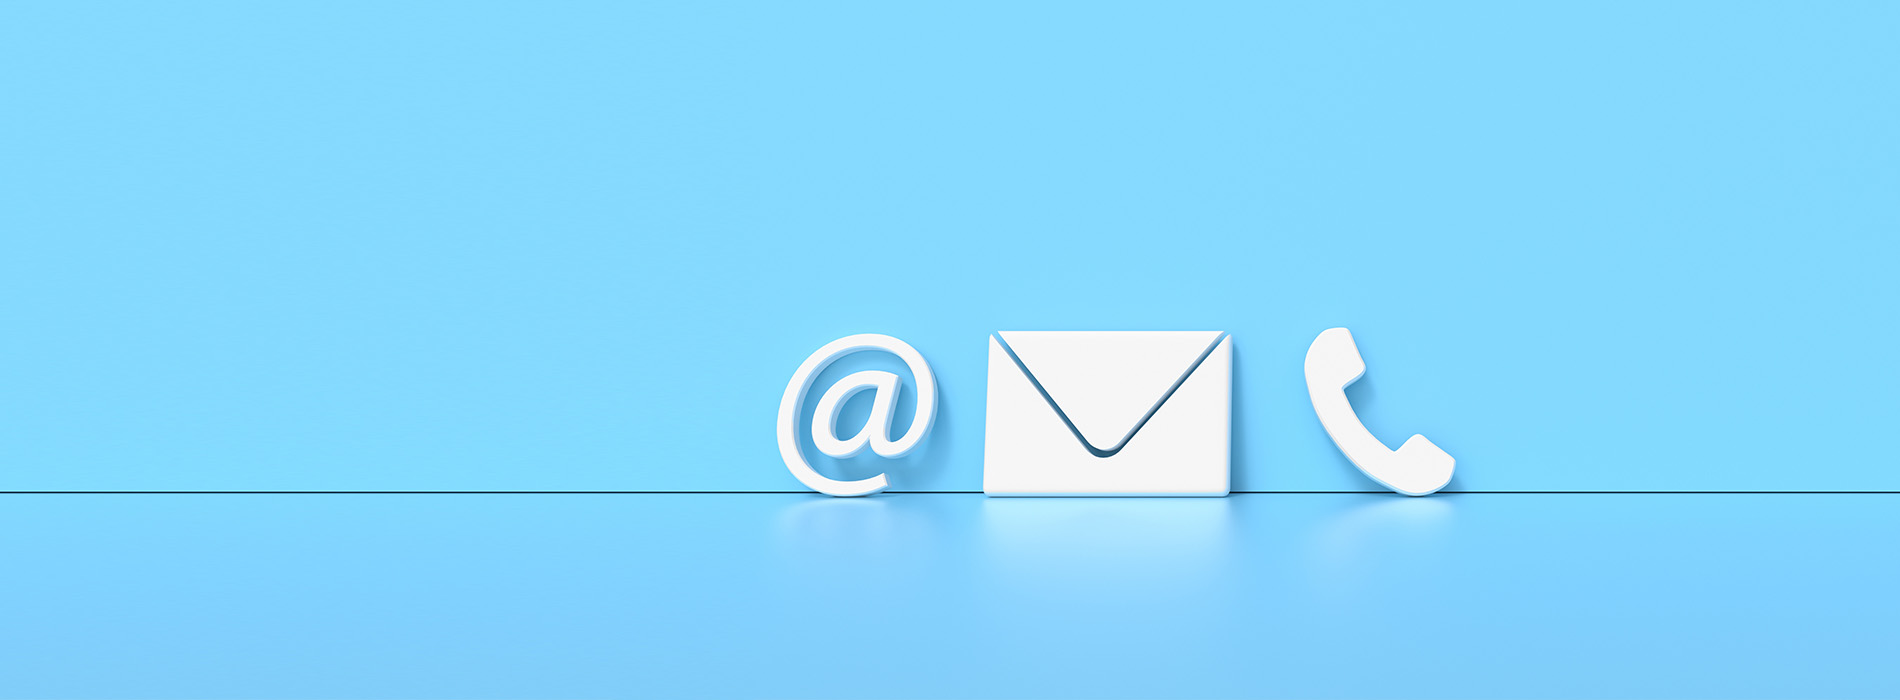 The image shows a computer screen with an open email application, displaying an envelope icon and a blank email composition window, set against a light blue background.